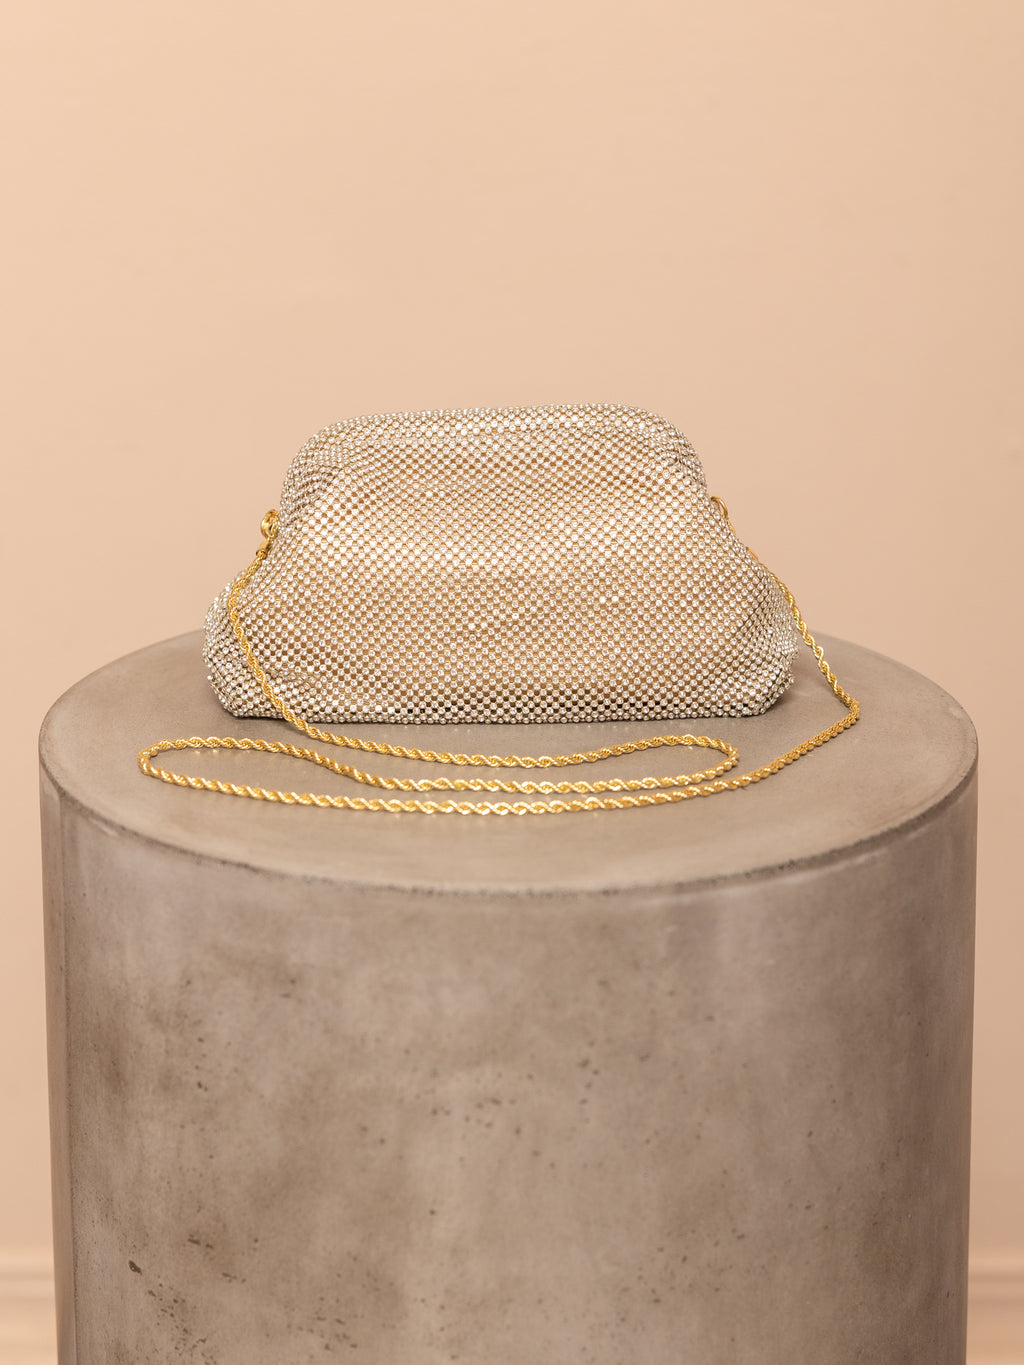 Doreen Frame Pouch in Gold